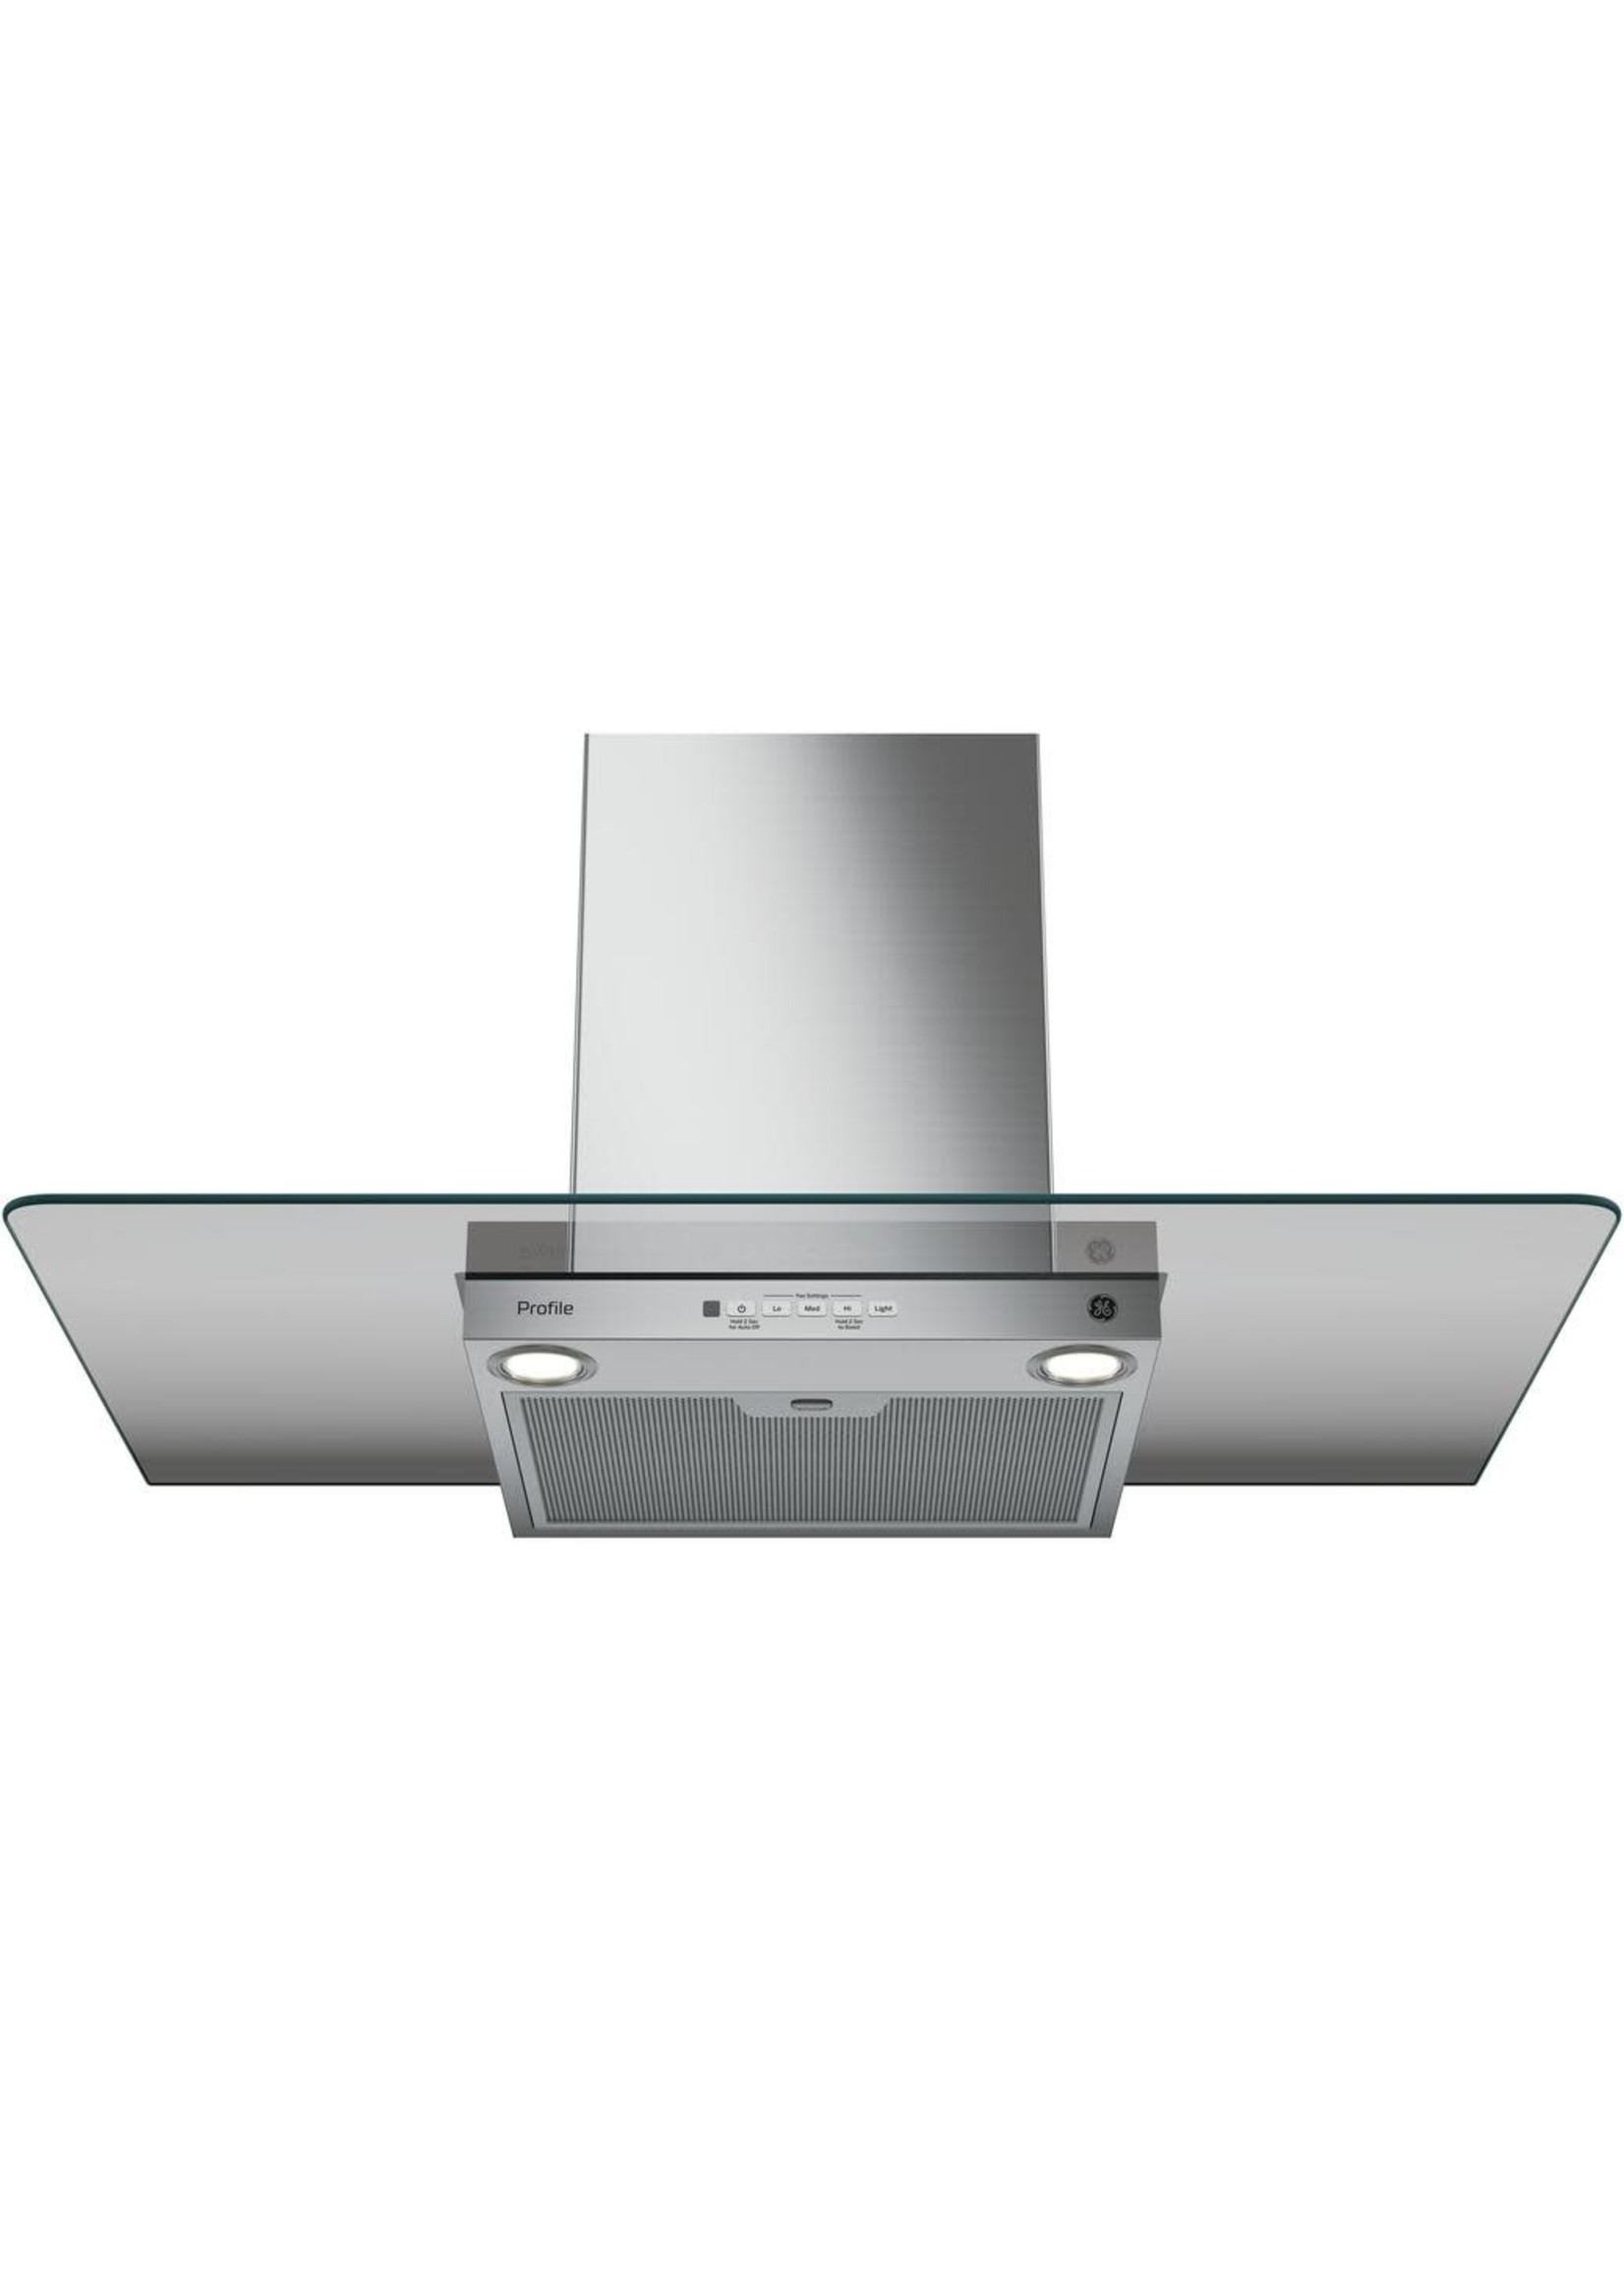 GE Profile PVW7361SJSS 36 Inch Wall Mount Convertible Hood with 350 CFM, Halogen Lights, Glass Canopy, Push Button Control in Stainless Steel